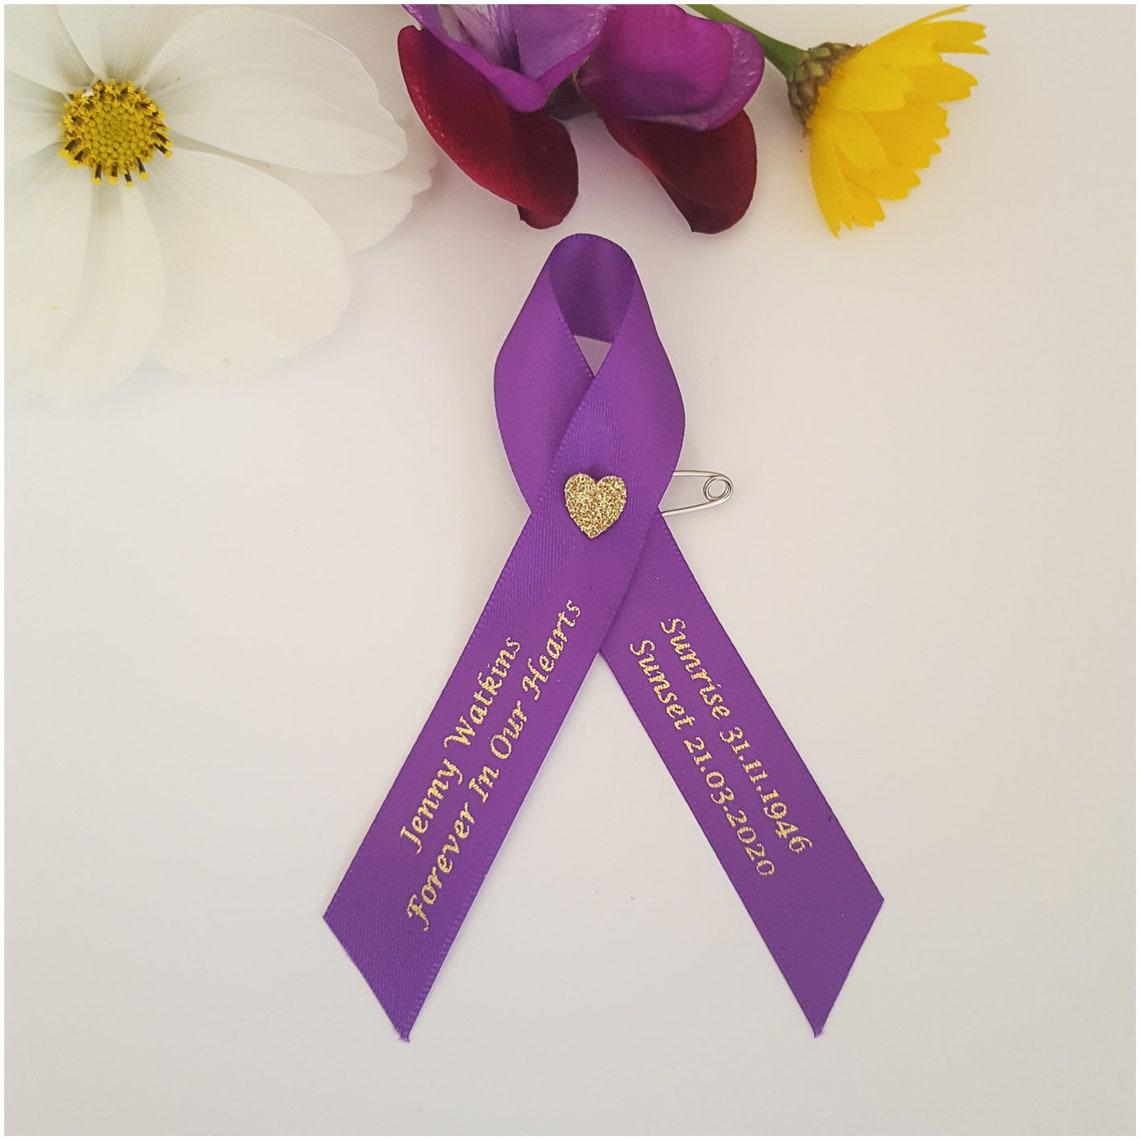 Memorial ribbon with gold heart